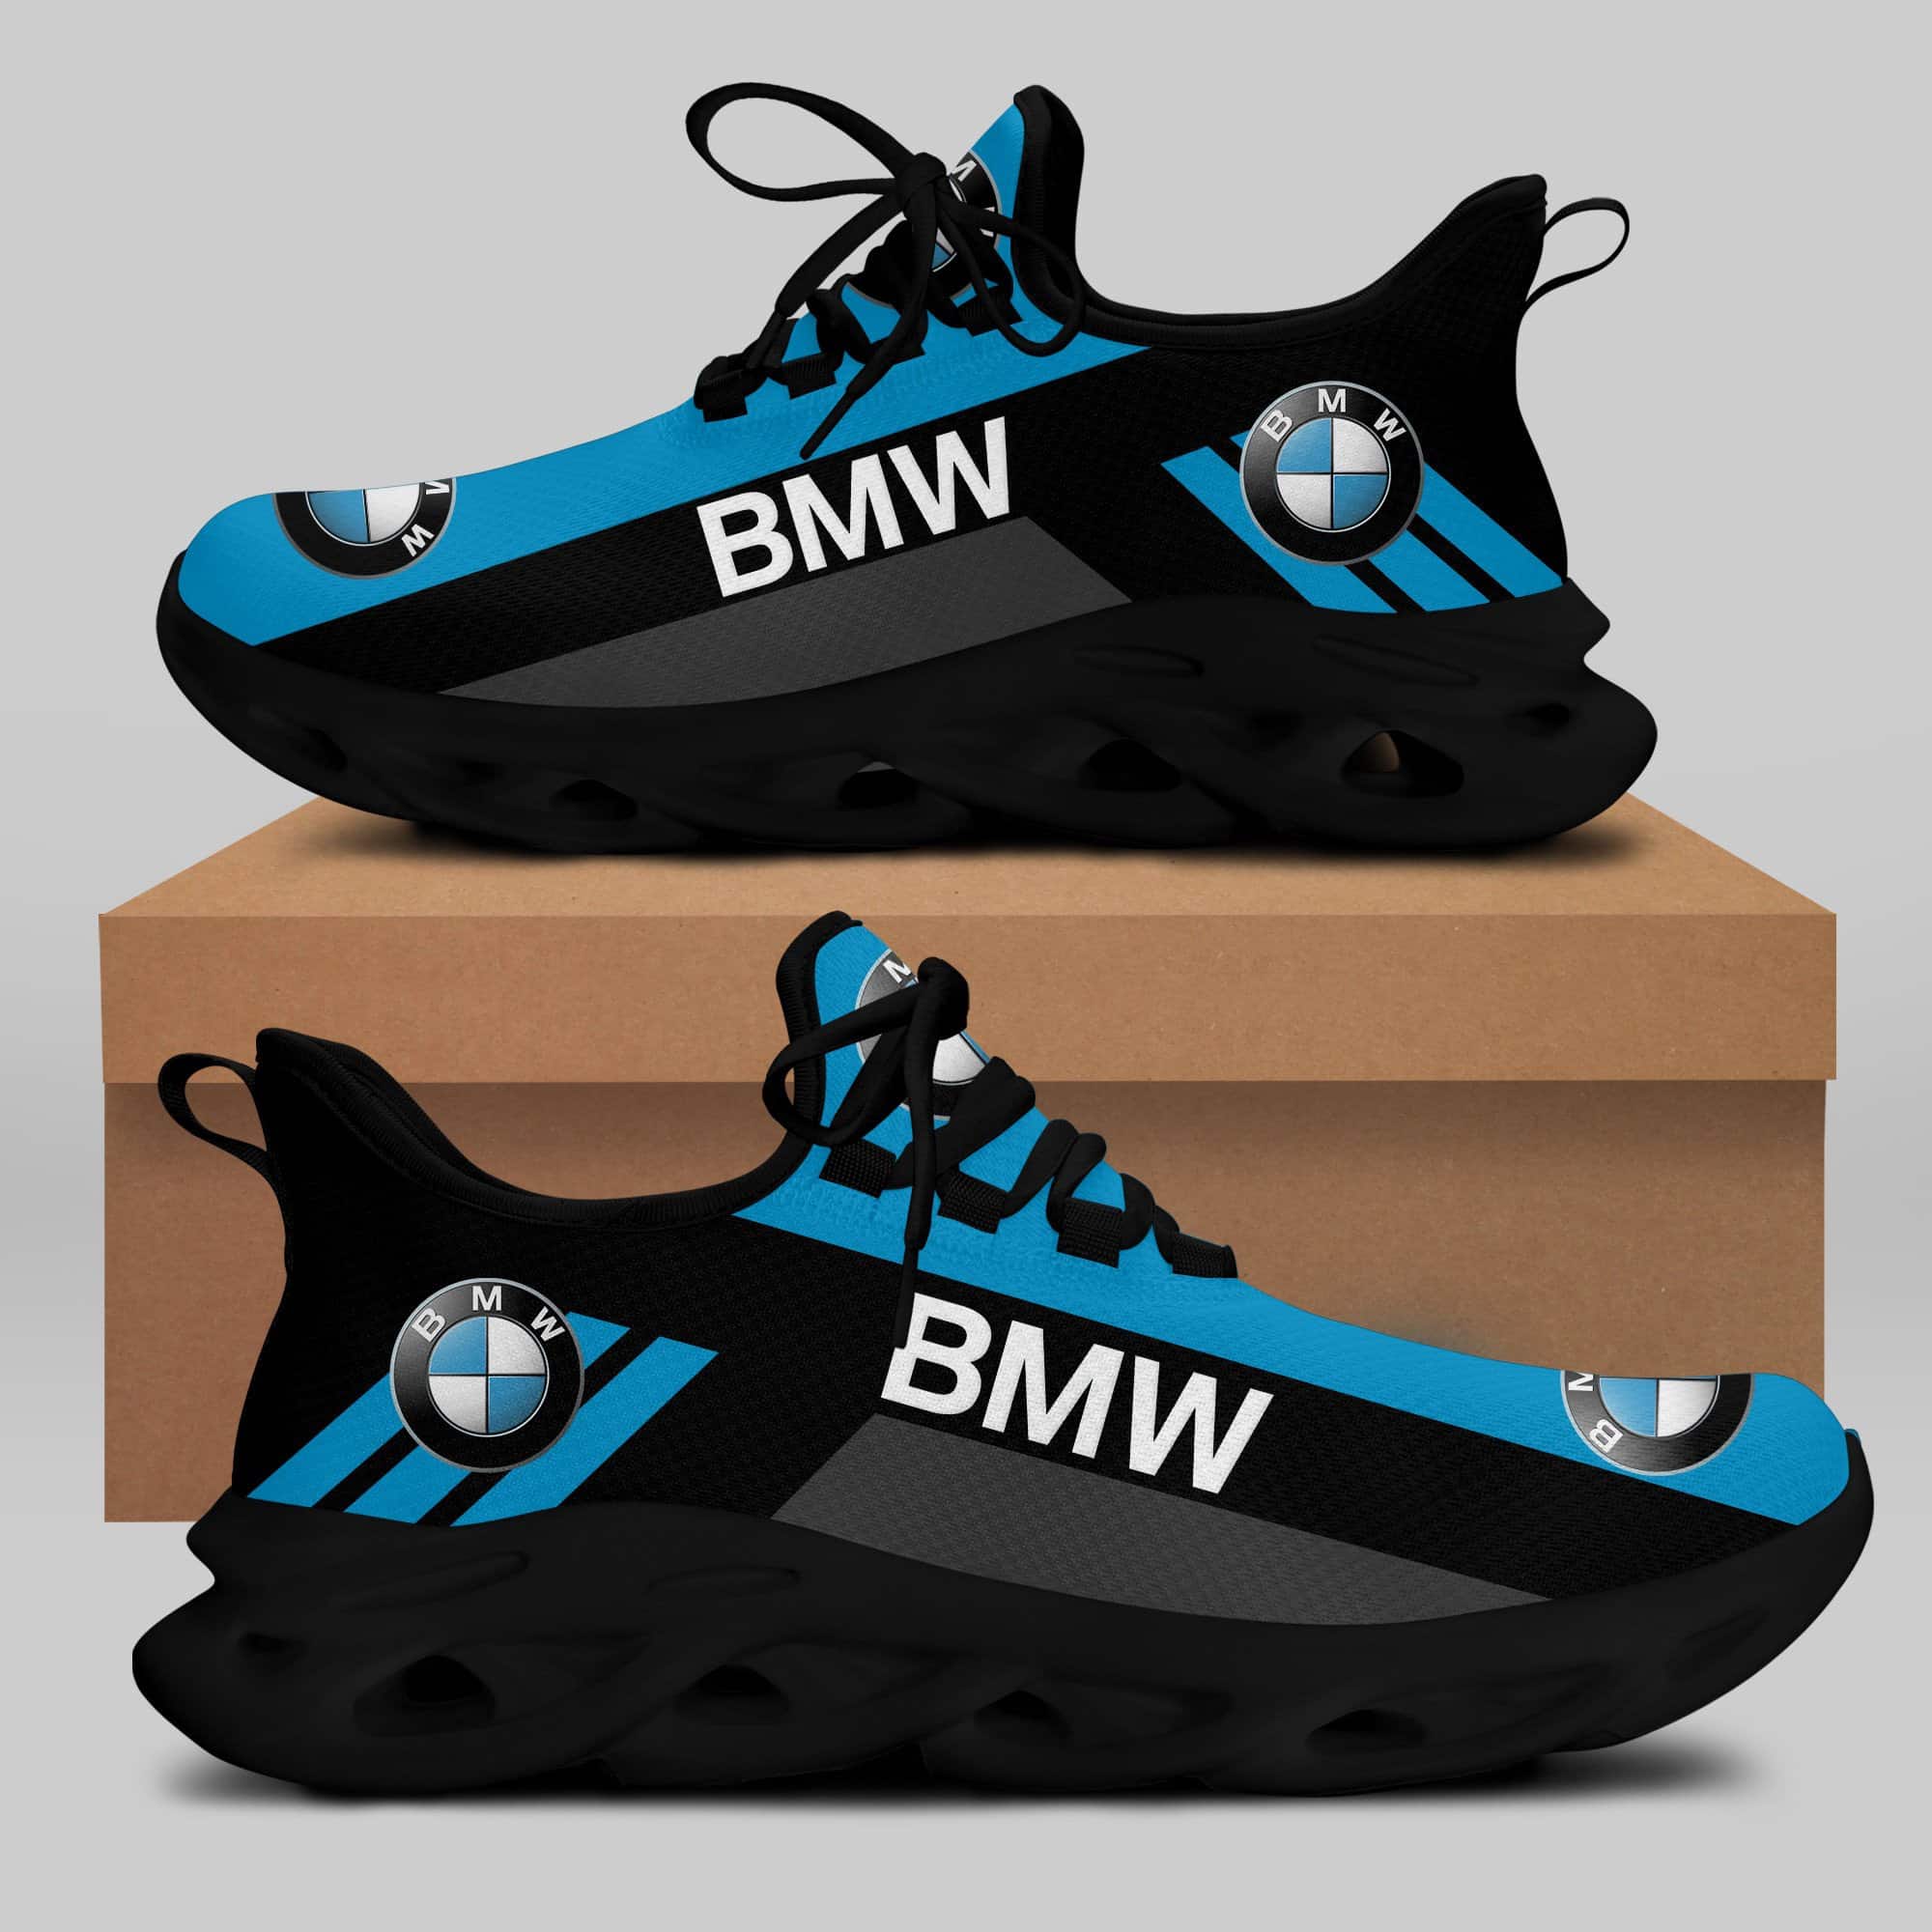 Bmw Running Shoes Max Soul Shoes Sneakers Ver 20 1